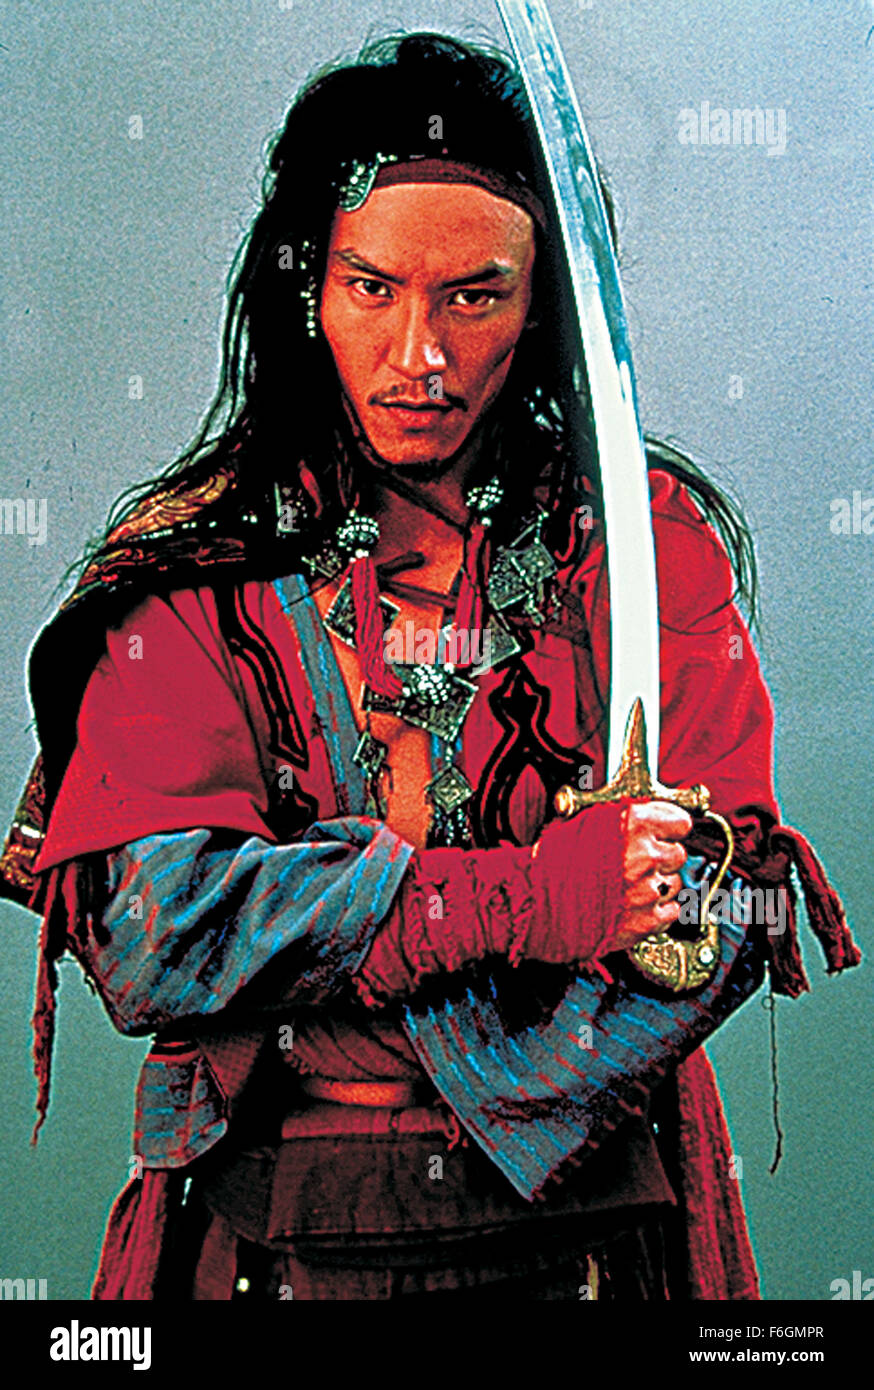 RELEASE DATE: December 22, 2000. MOVIE TITLE: Crouching Tiger Hidden Dragon. STUDIO: United China Vision. PLOT: The disappearance of a magical jade sword spurs a breathtaking quest for the missing treasure. Li is embittered by the loss of his jade sword, and his unrequited pursuit of Yu is further complicated by the mysterious intrusion of an assassin. The identity of the assassin is gradually unveiled as another poignant tale of love begins to ravel with that of Li and Yu against the backdrop of Western China's magnificent landscape. PICTURED: . Stock Photo